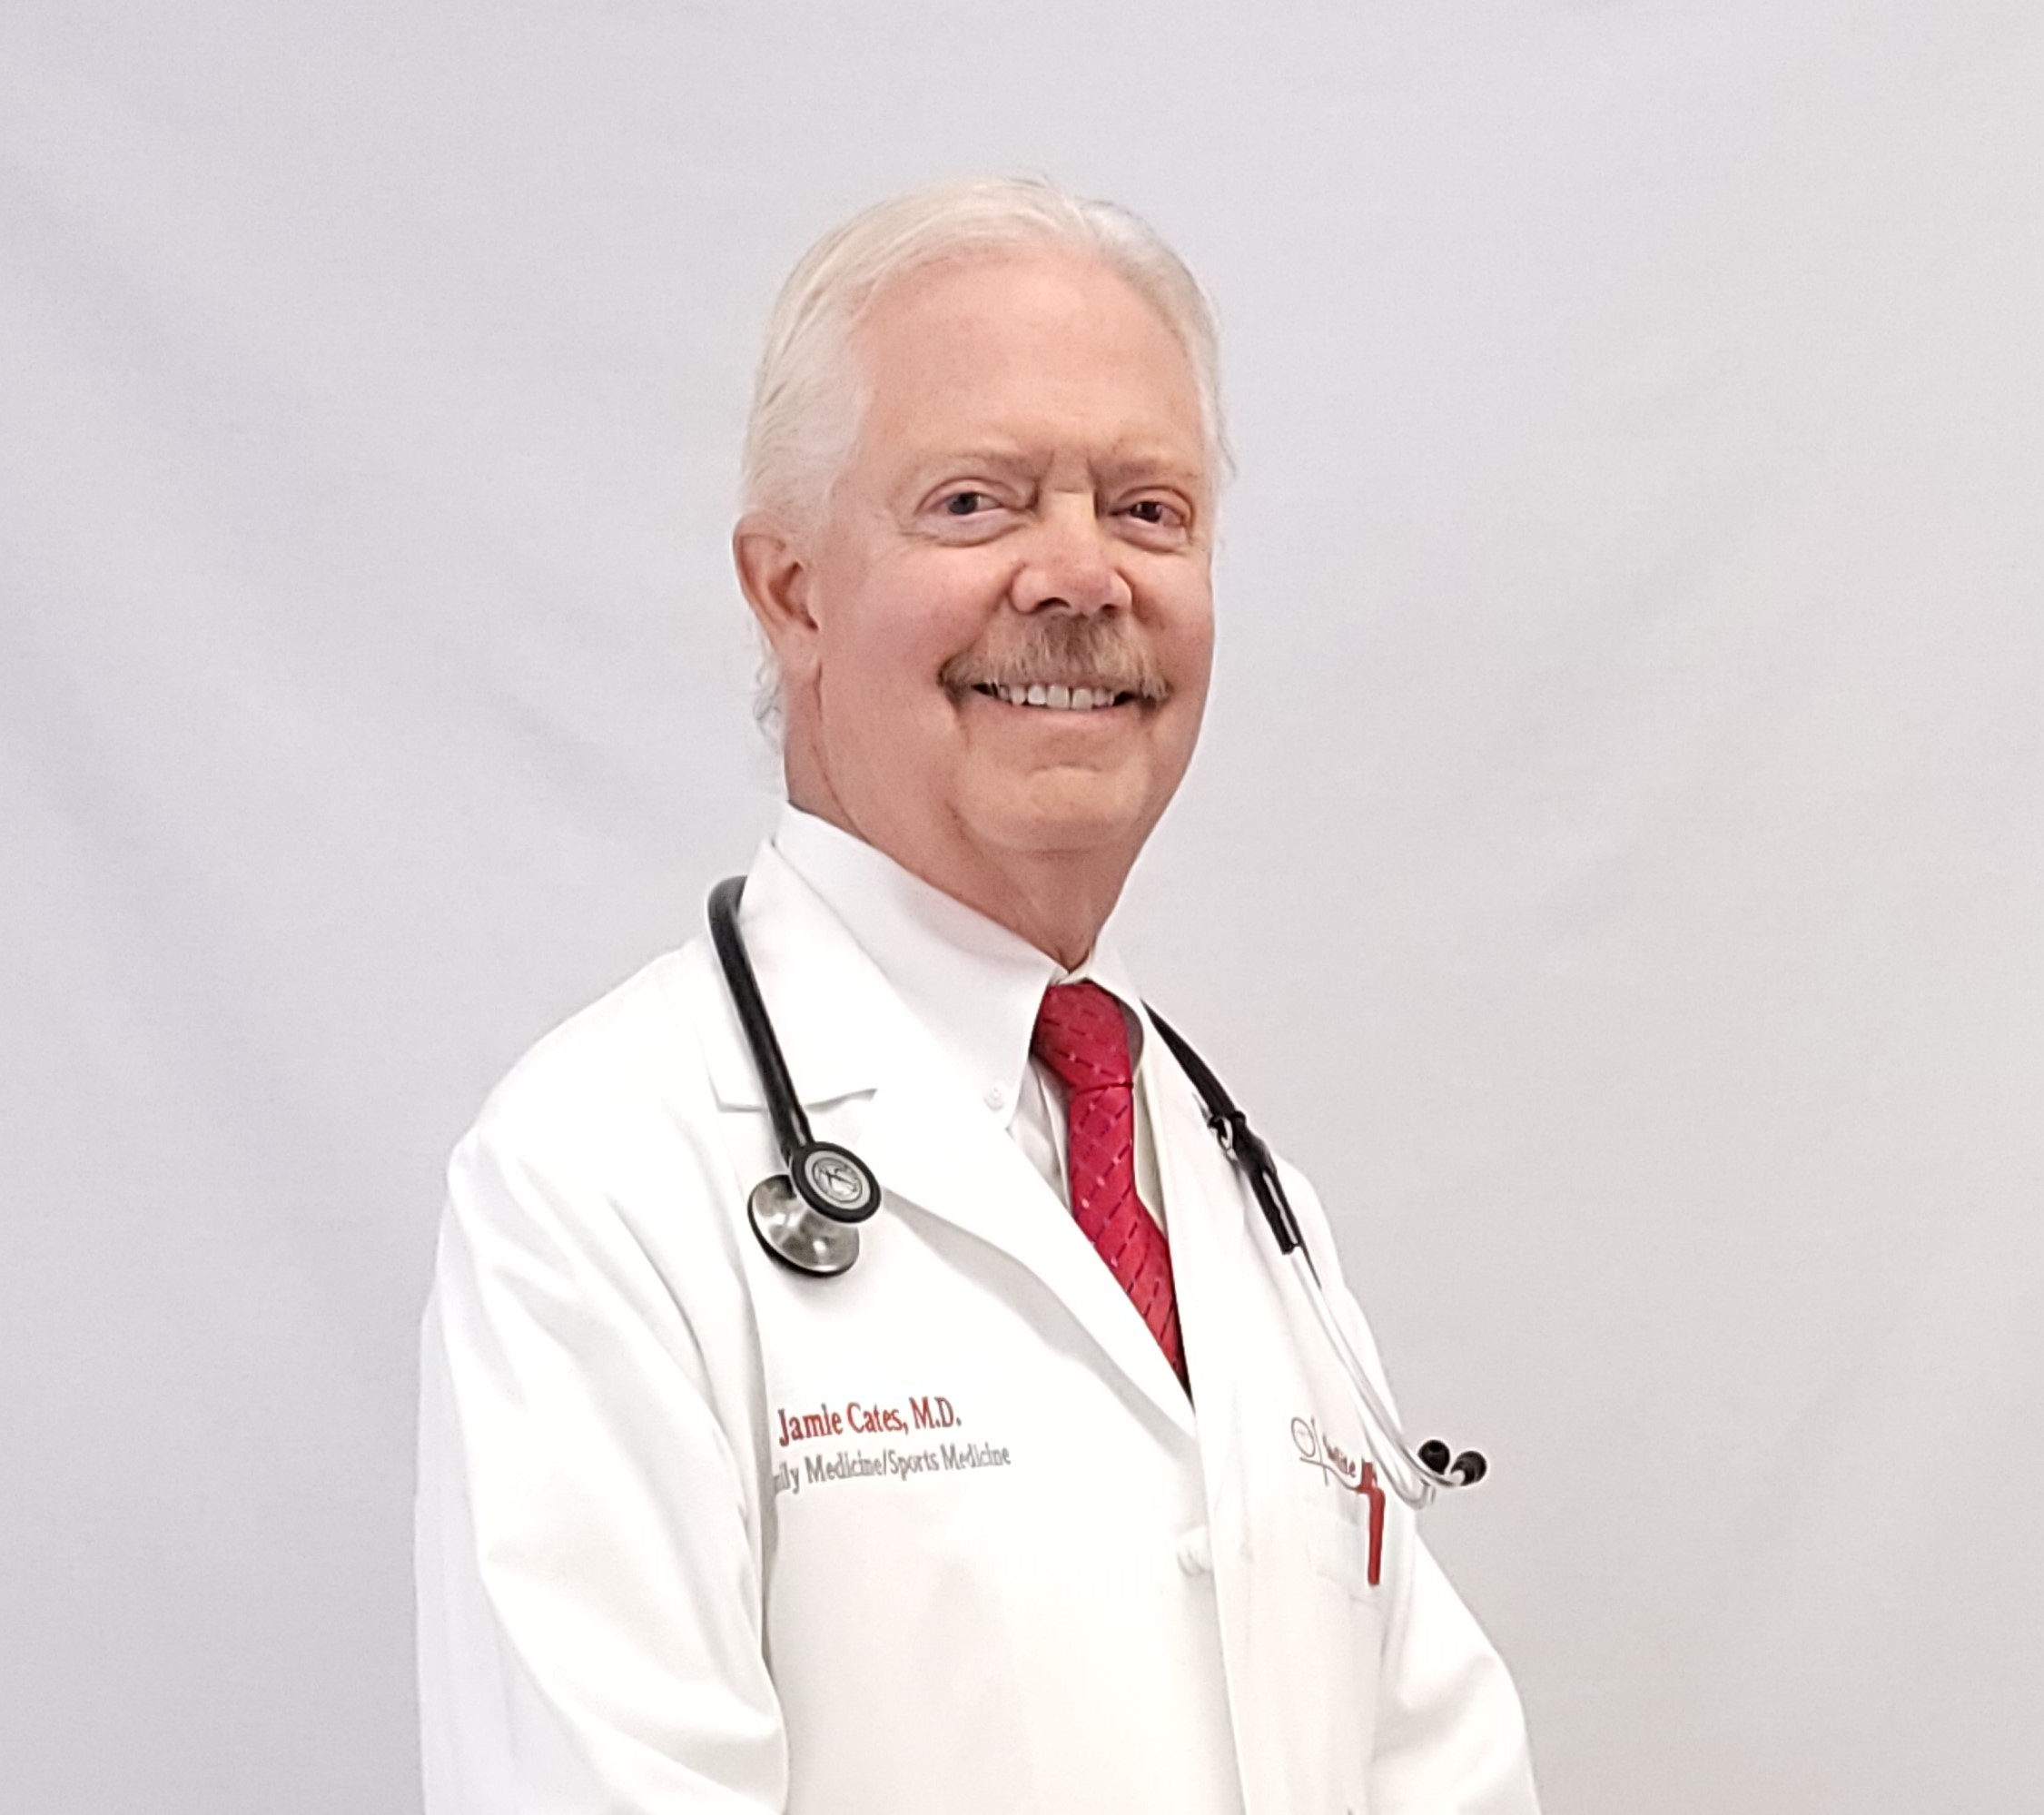 Dr. James Cates, MD